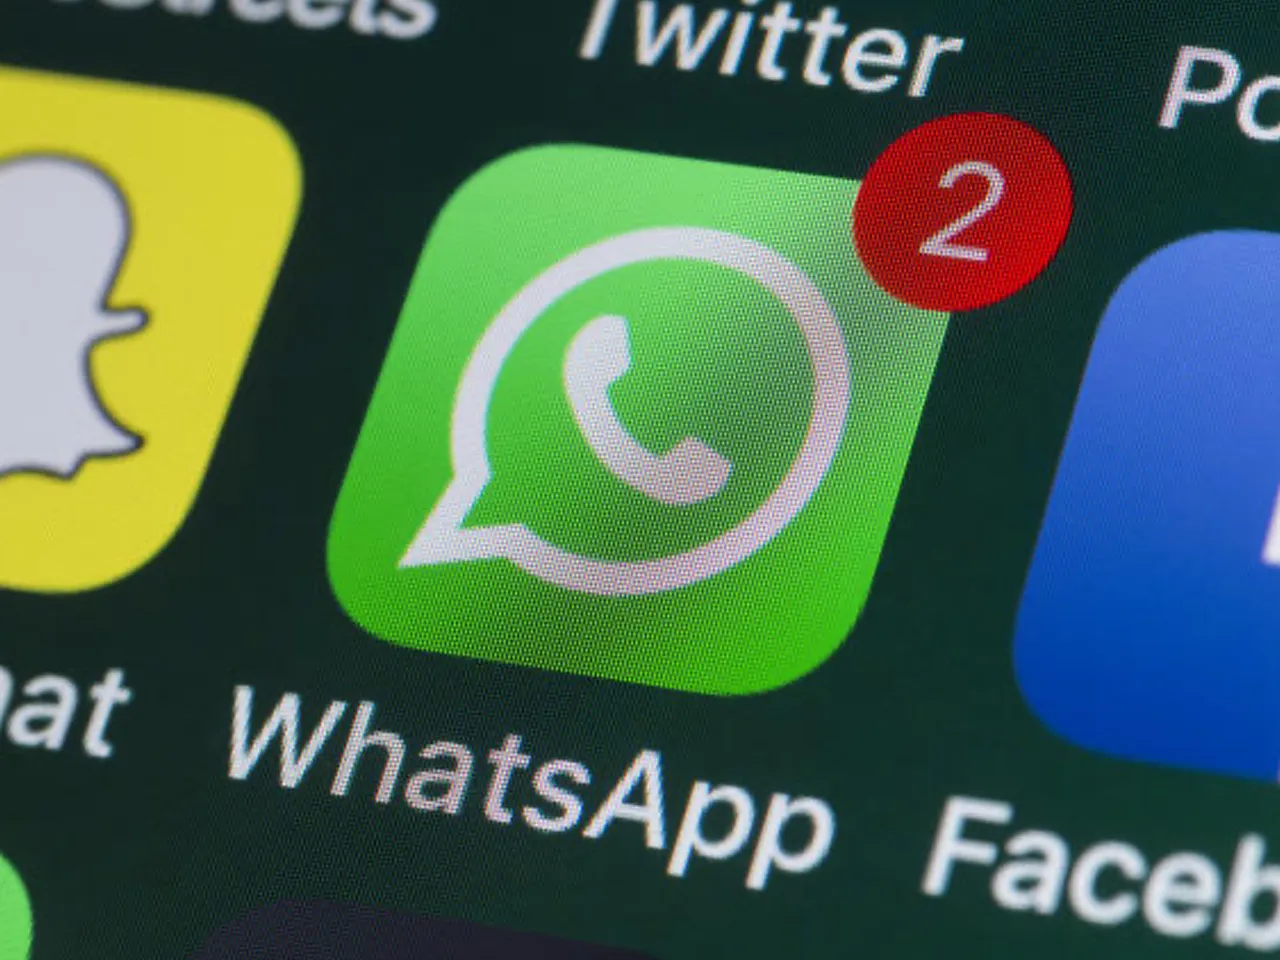 WhatsApp unveils chat filters to help find messages faster